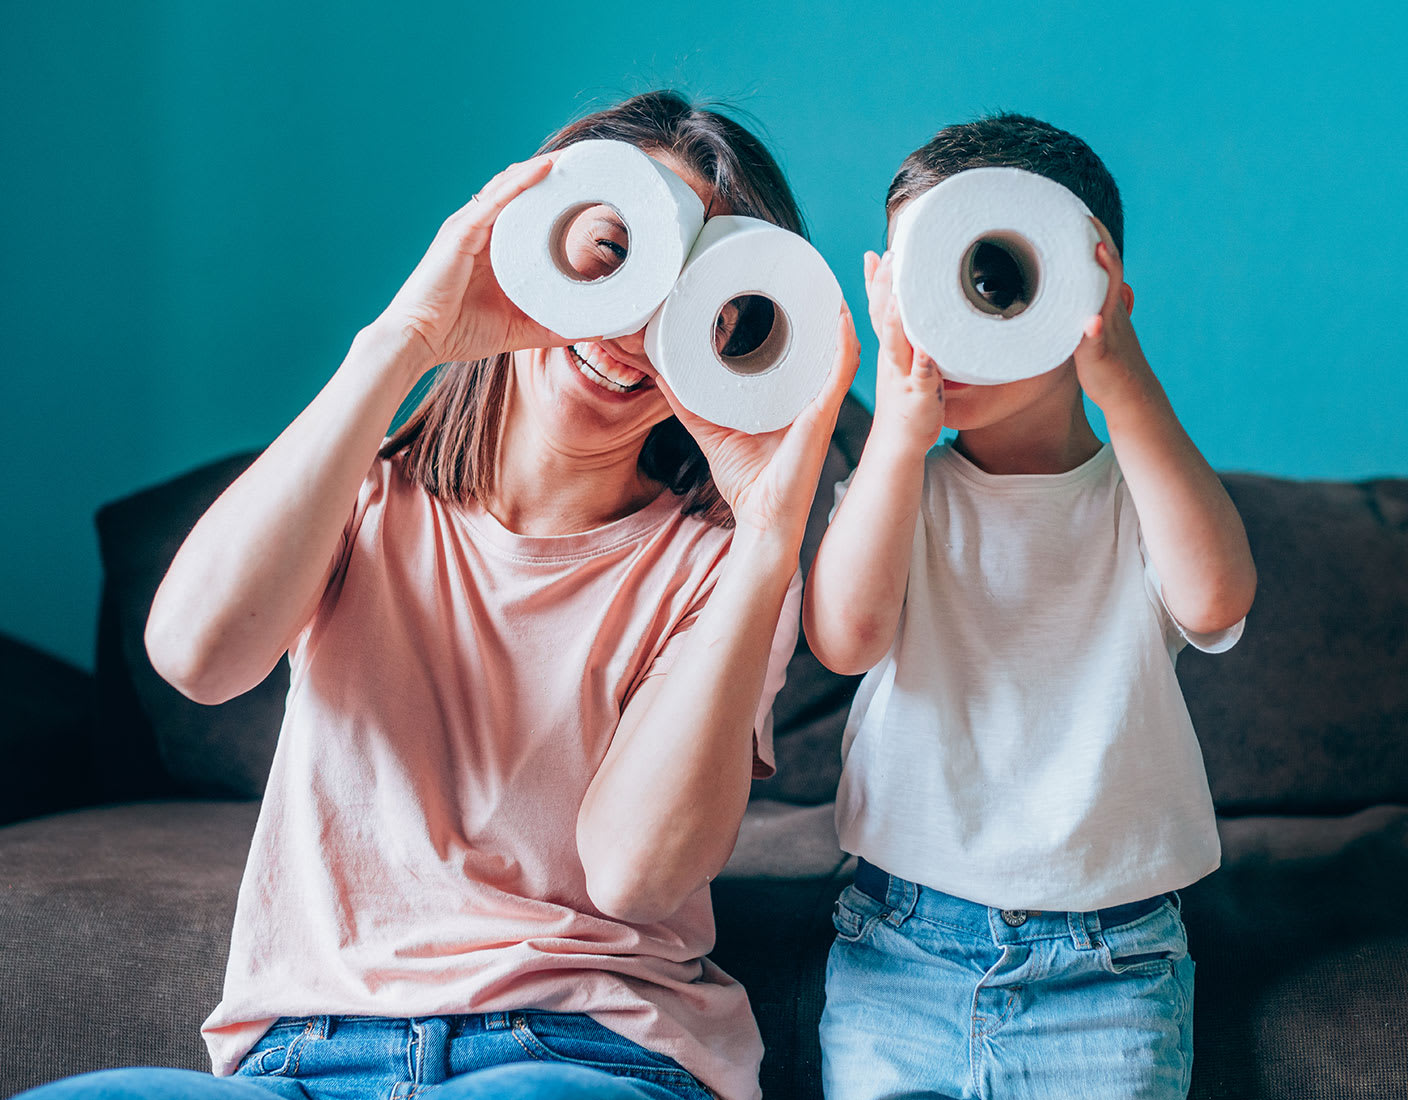 A woman and a child hold toilet paper rolls in front of their eyes, pretending to use them as binoculars, while sitting on a brown couch.